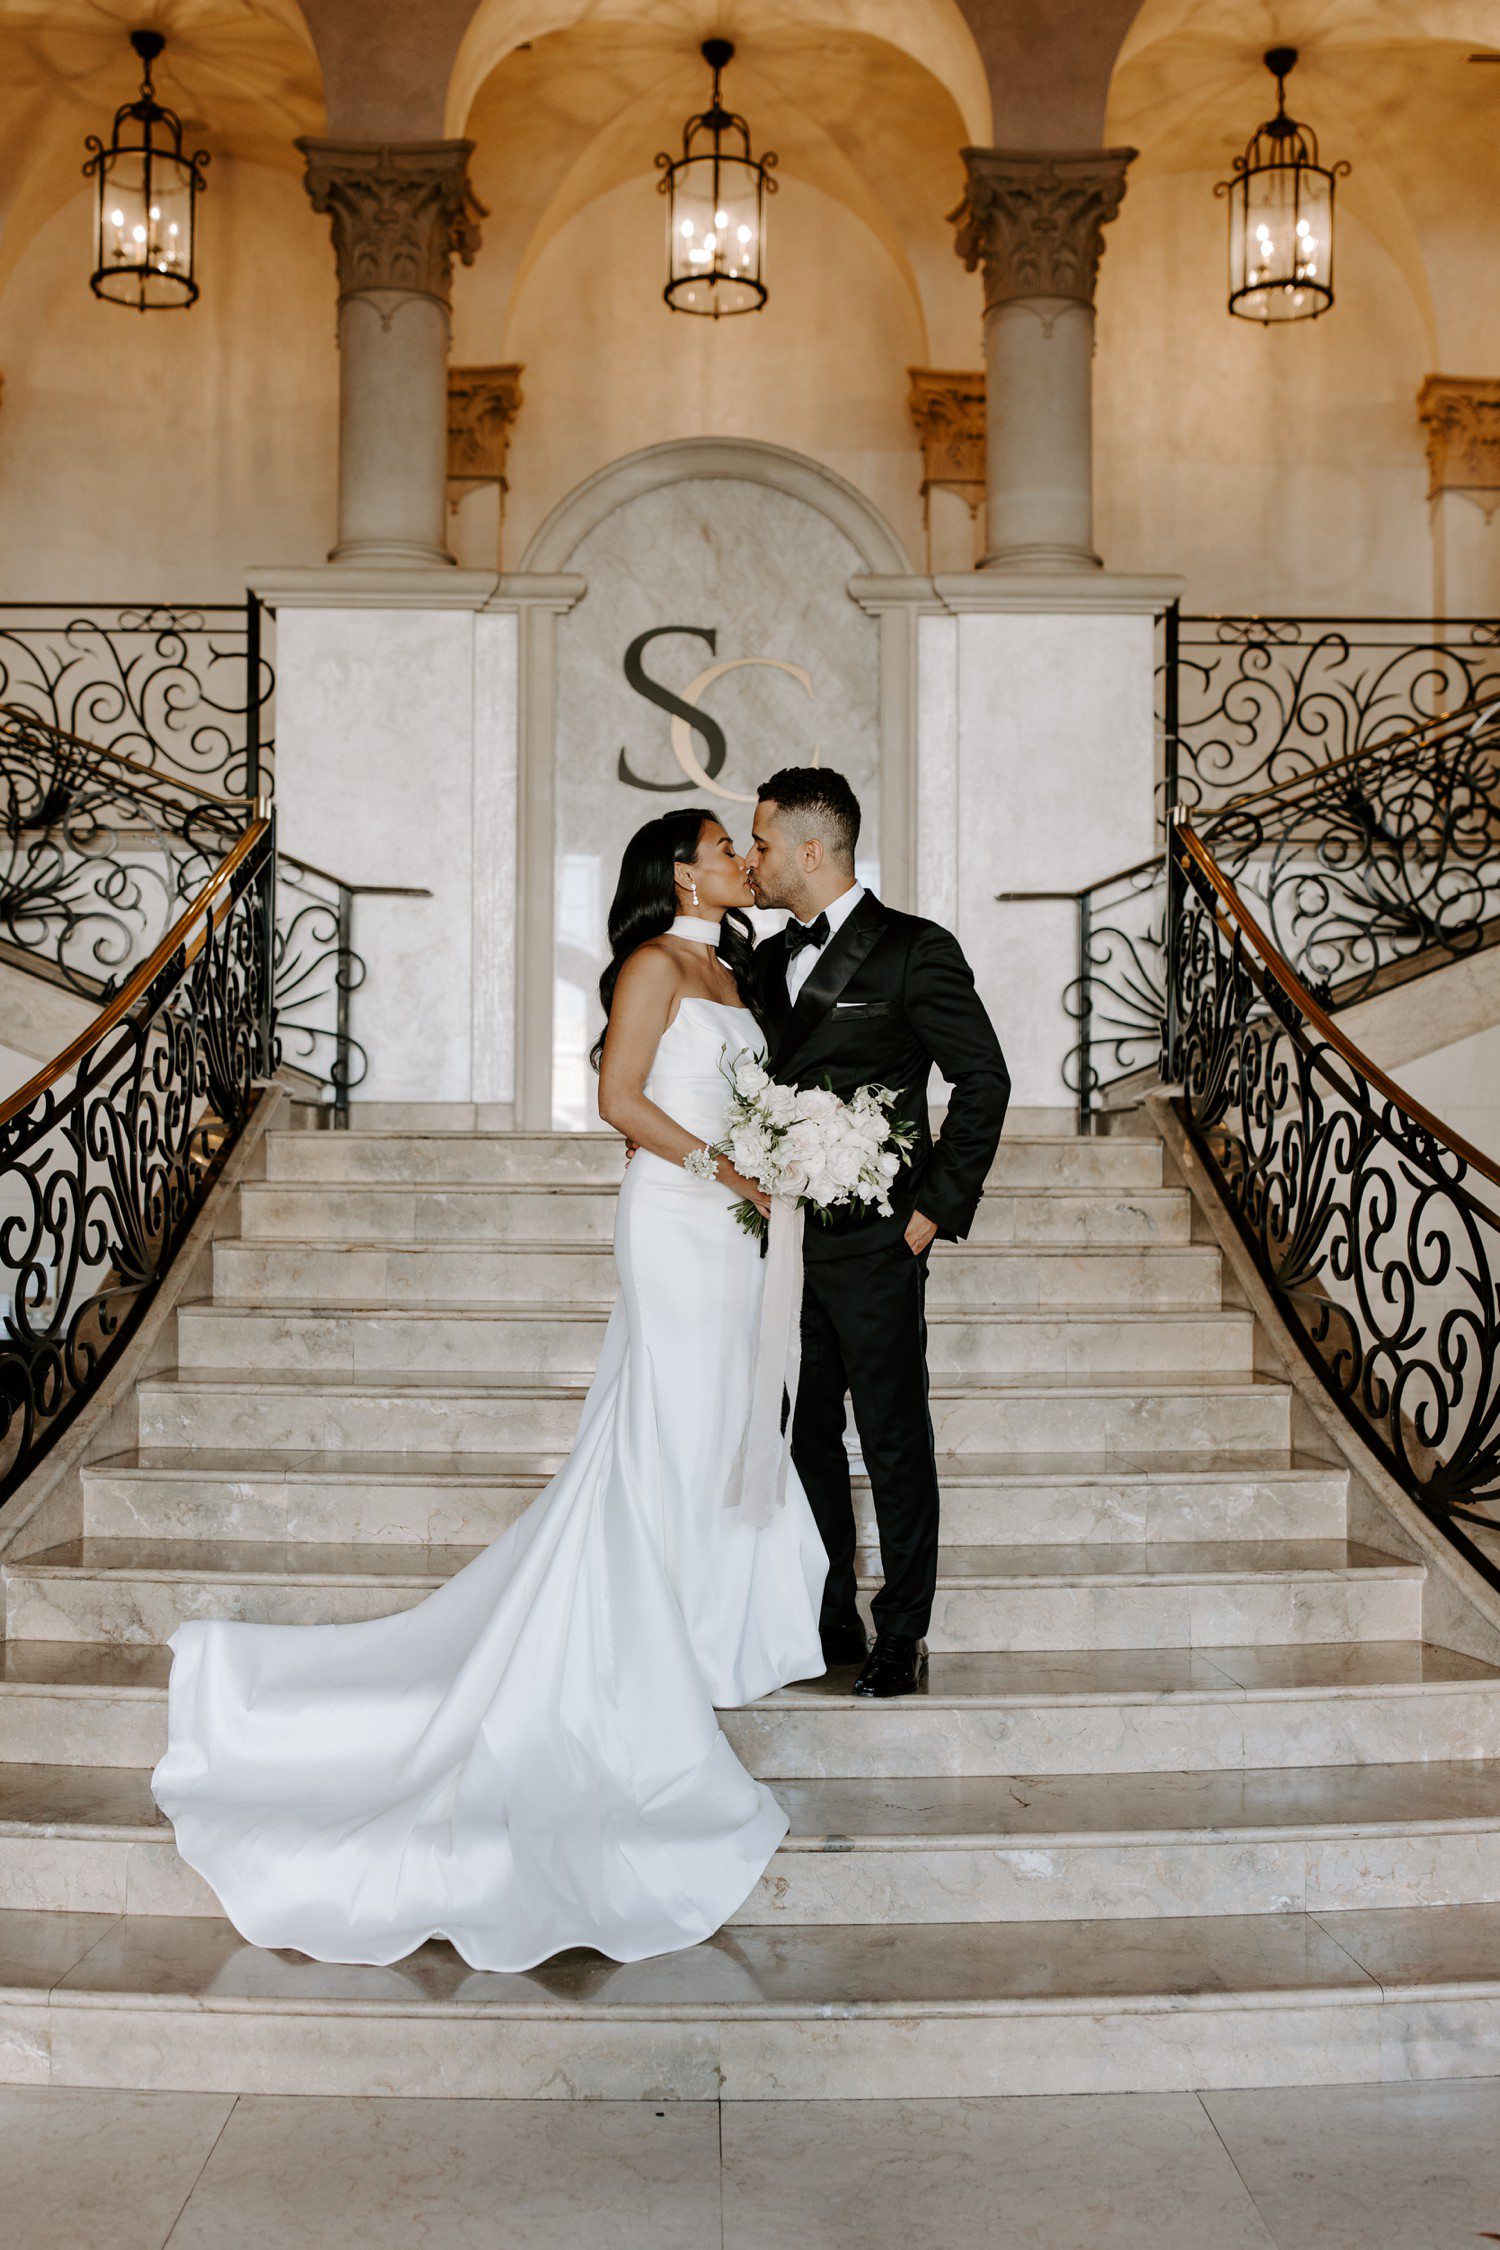 Bride and groom sharing a kiss on the stairs of The Stirling Club in Las Vegas